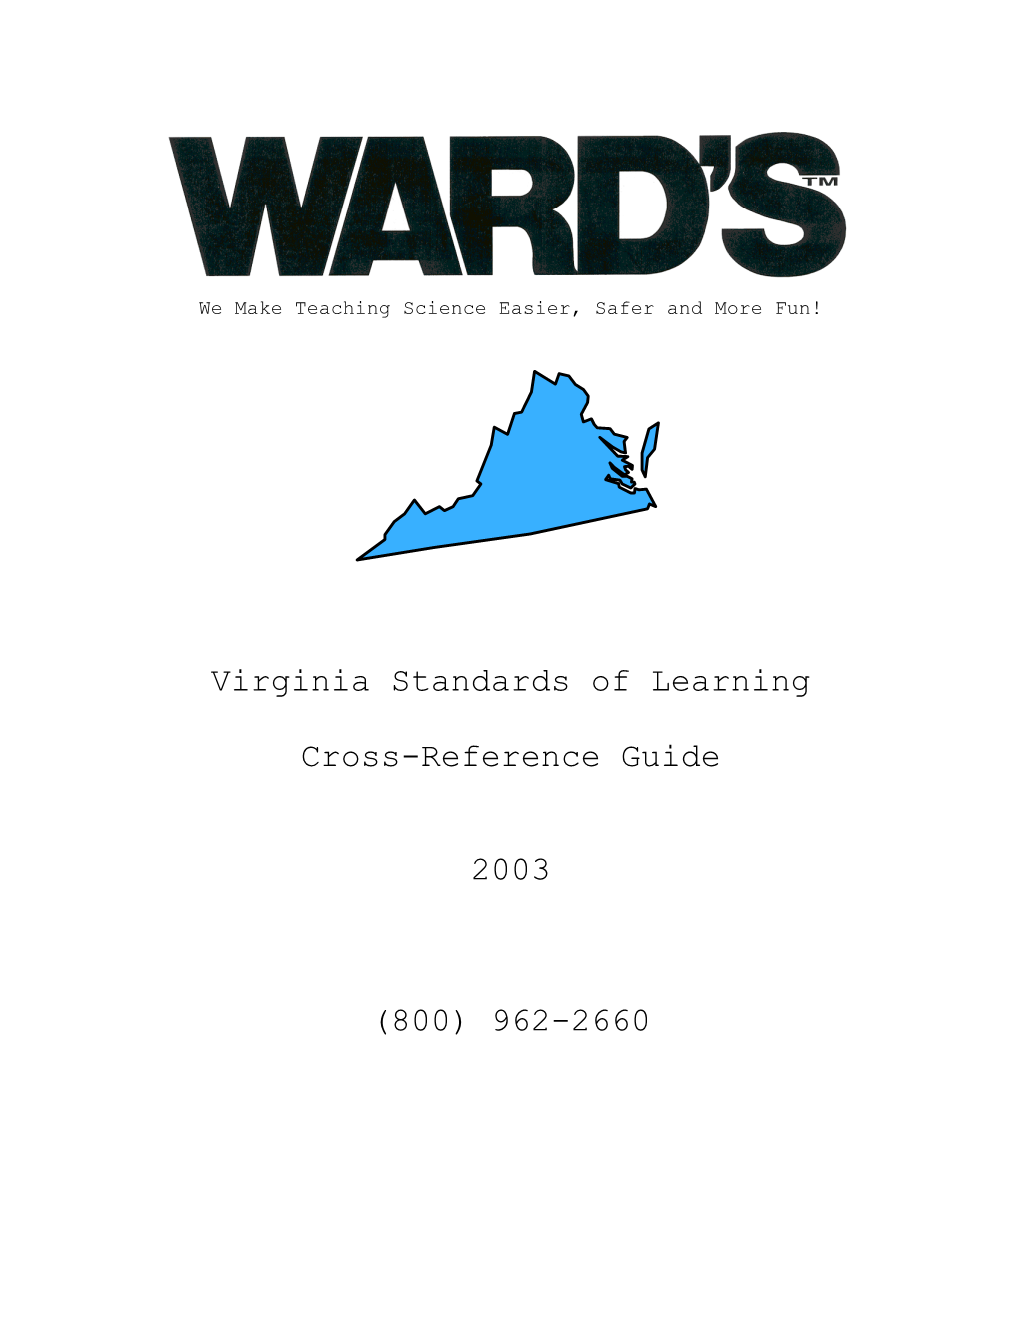 Virginia Standards of Learning